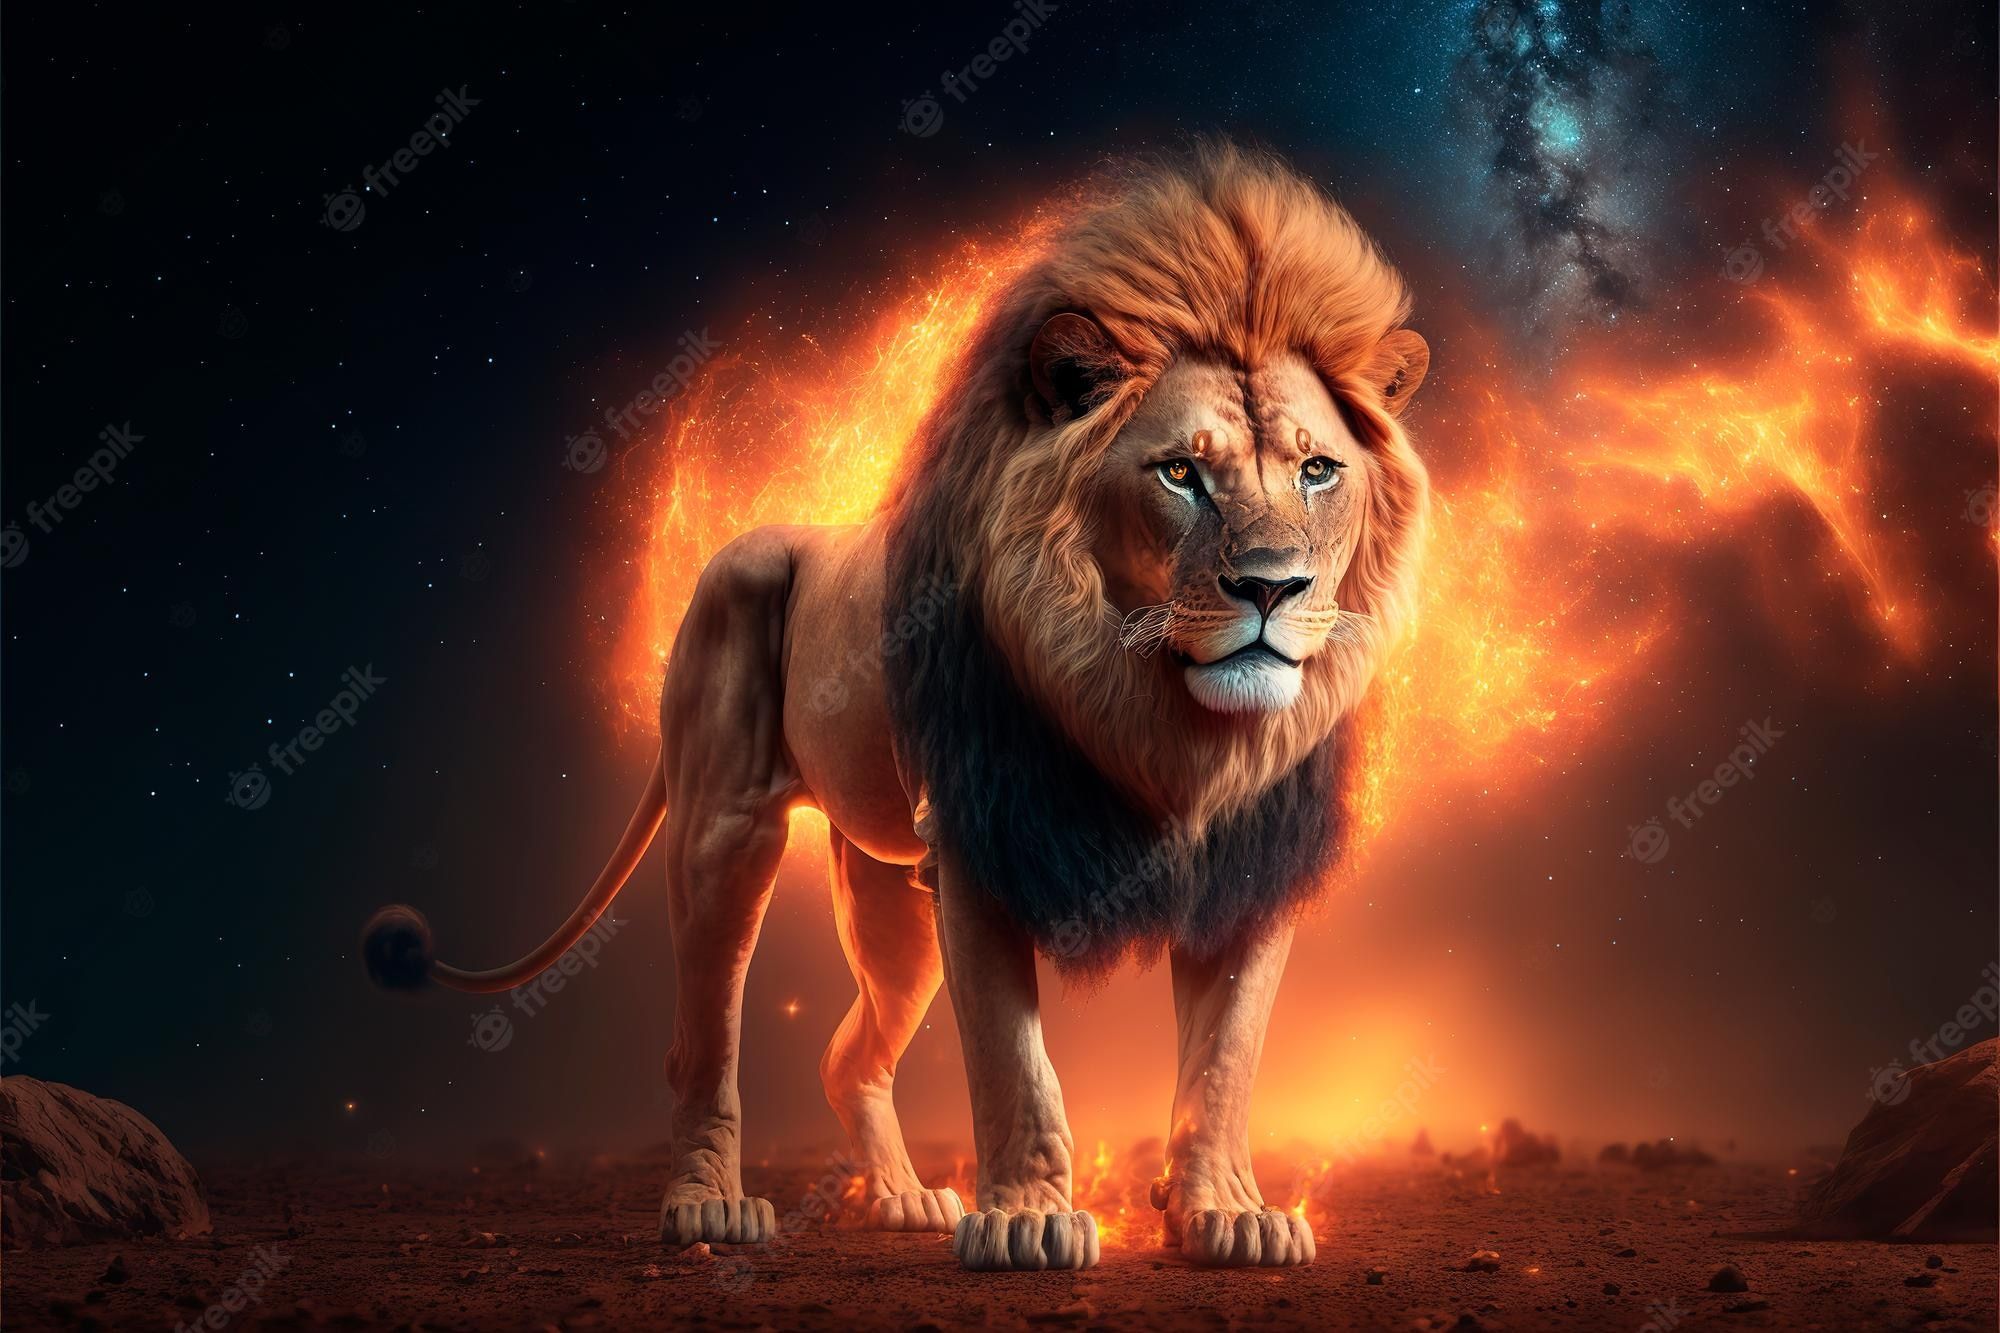 A lion standing in front of the stars - Lion